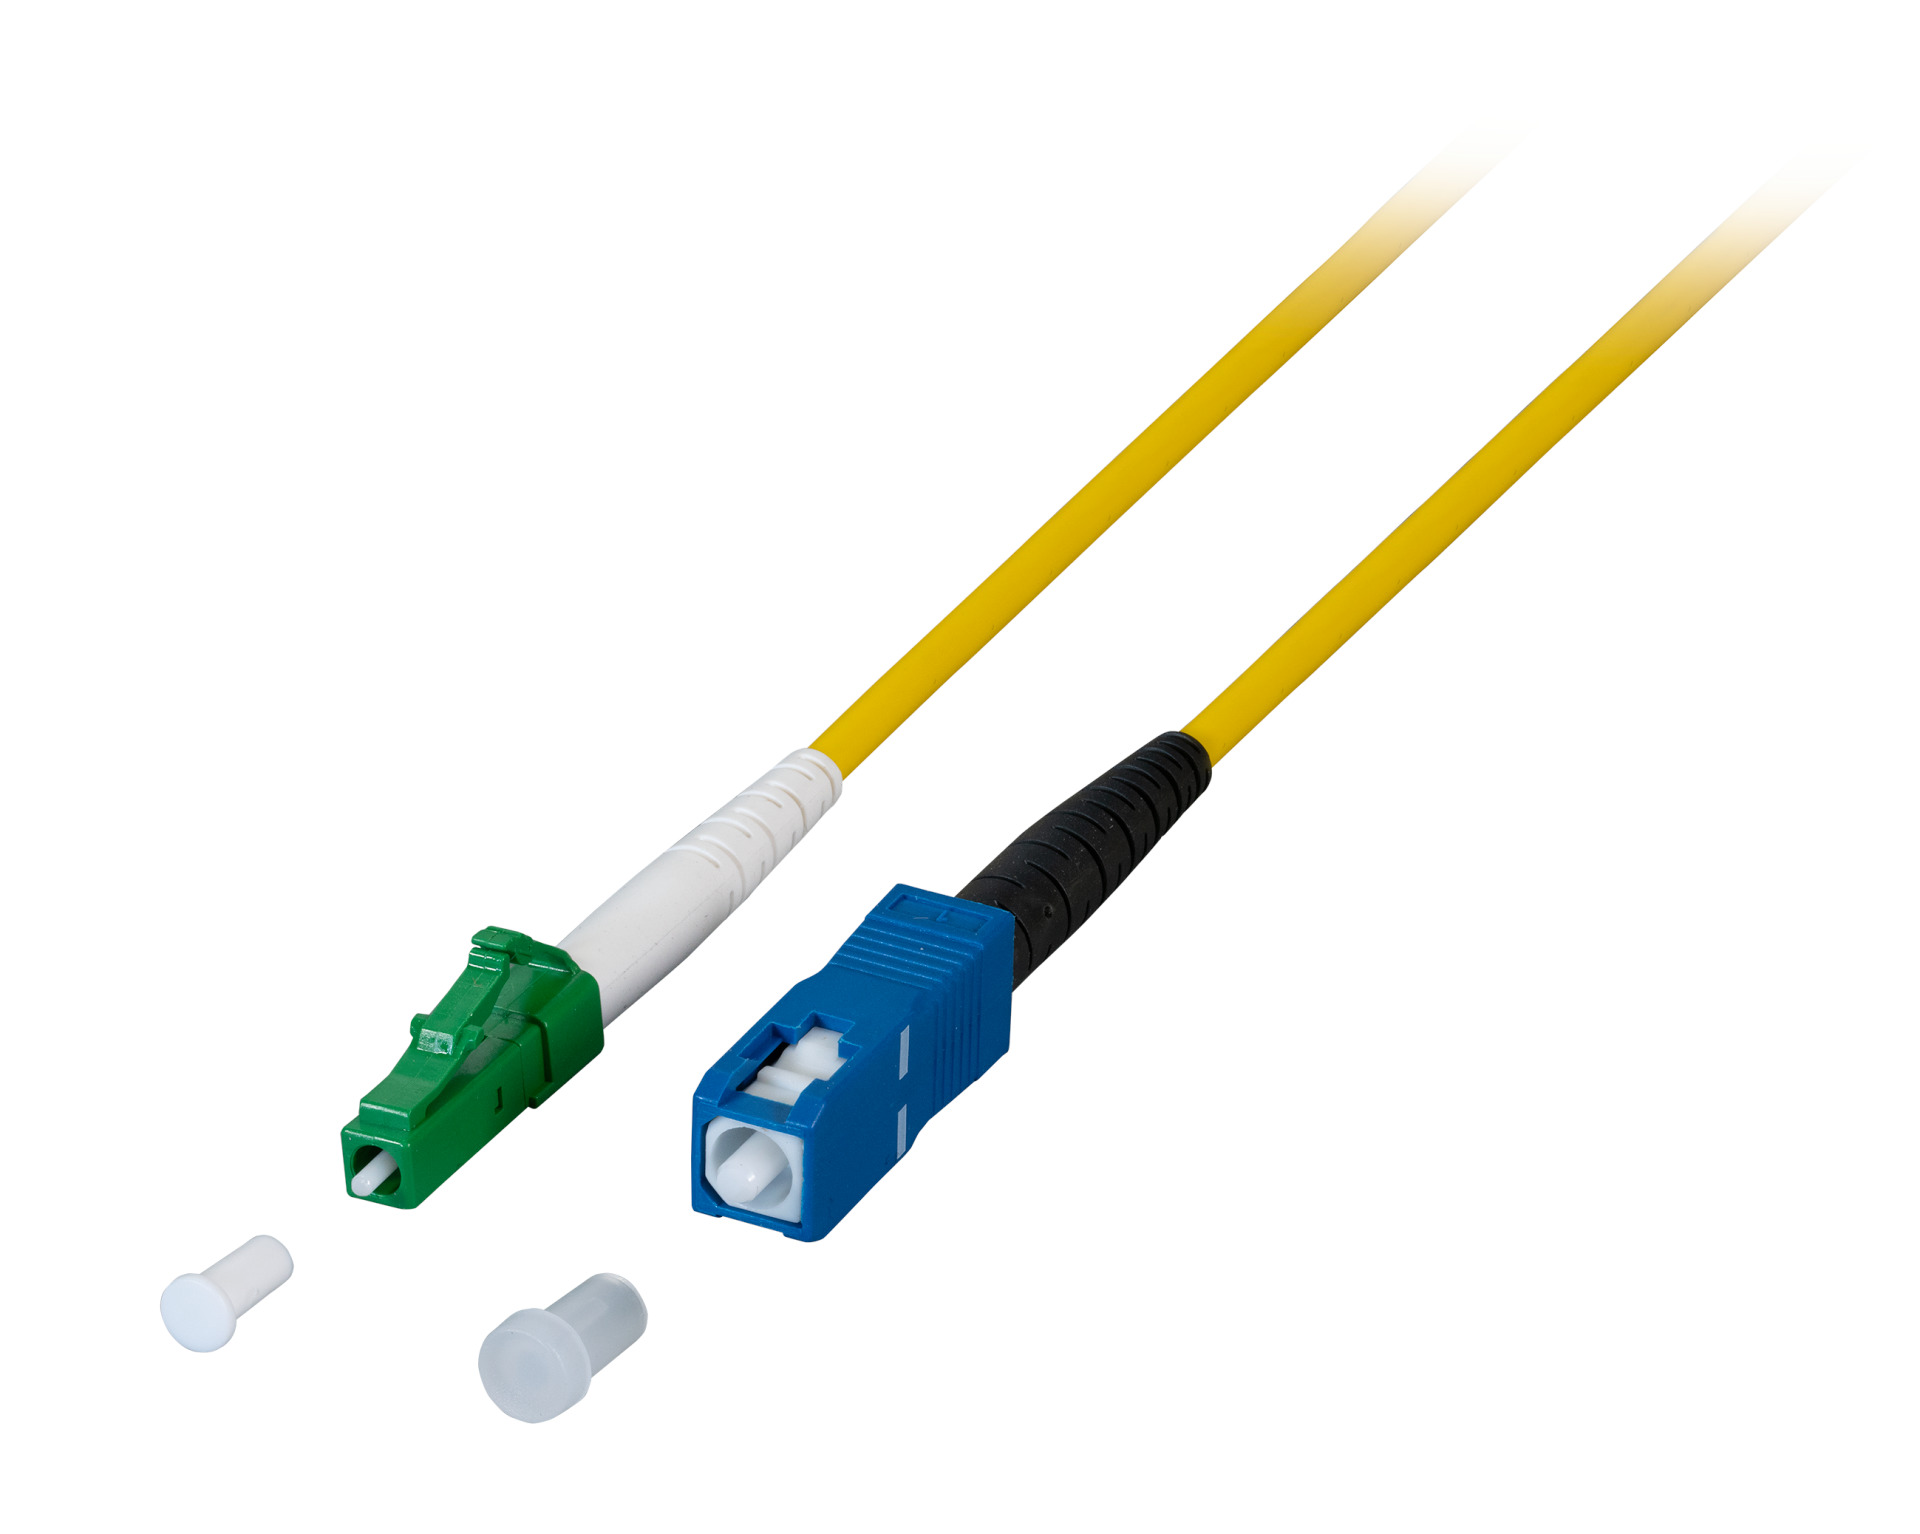 Simplex FO Patch Cable LC/APC-SC G657.A2 5m 3,0mm yellow 9/125µm